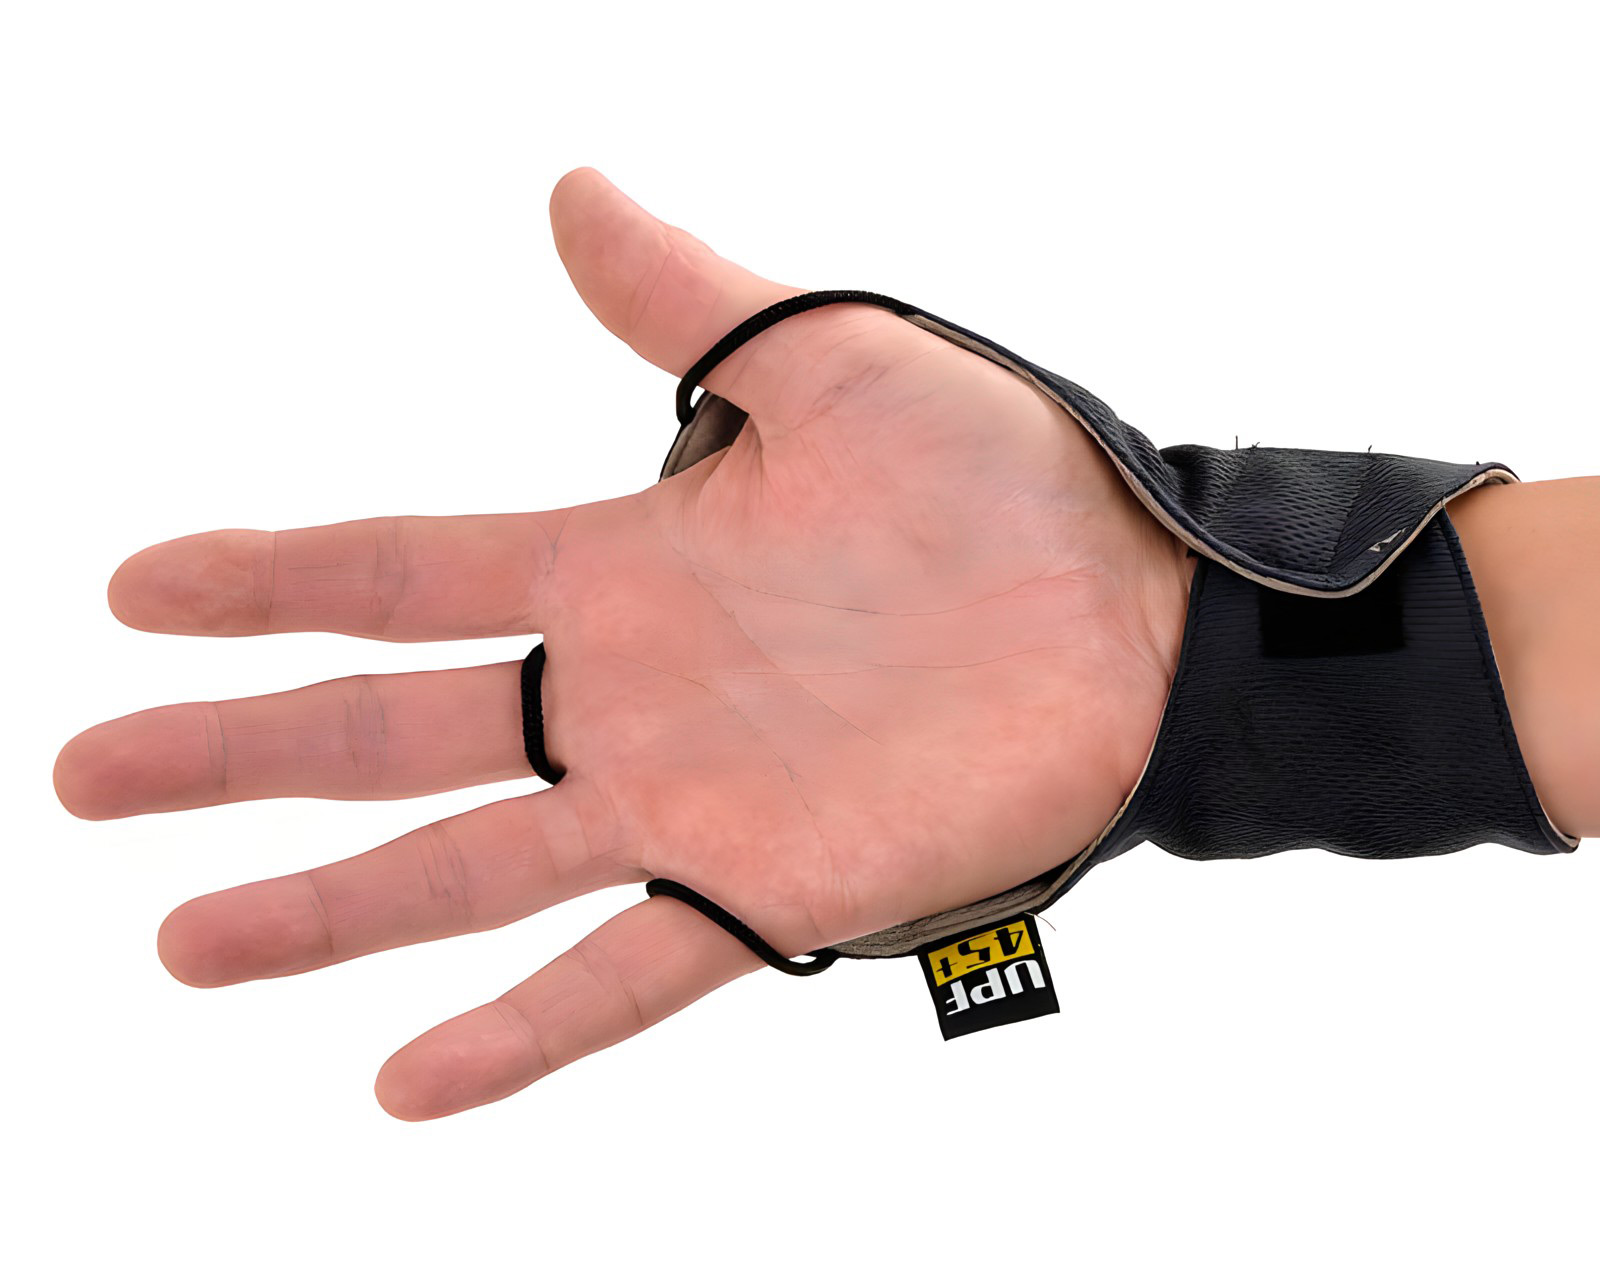 Palmless gloves protect backs of hands leaving your fingers free and cool.